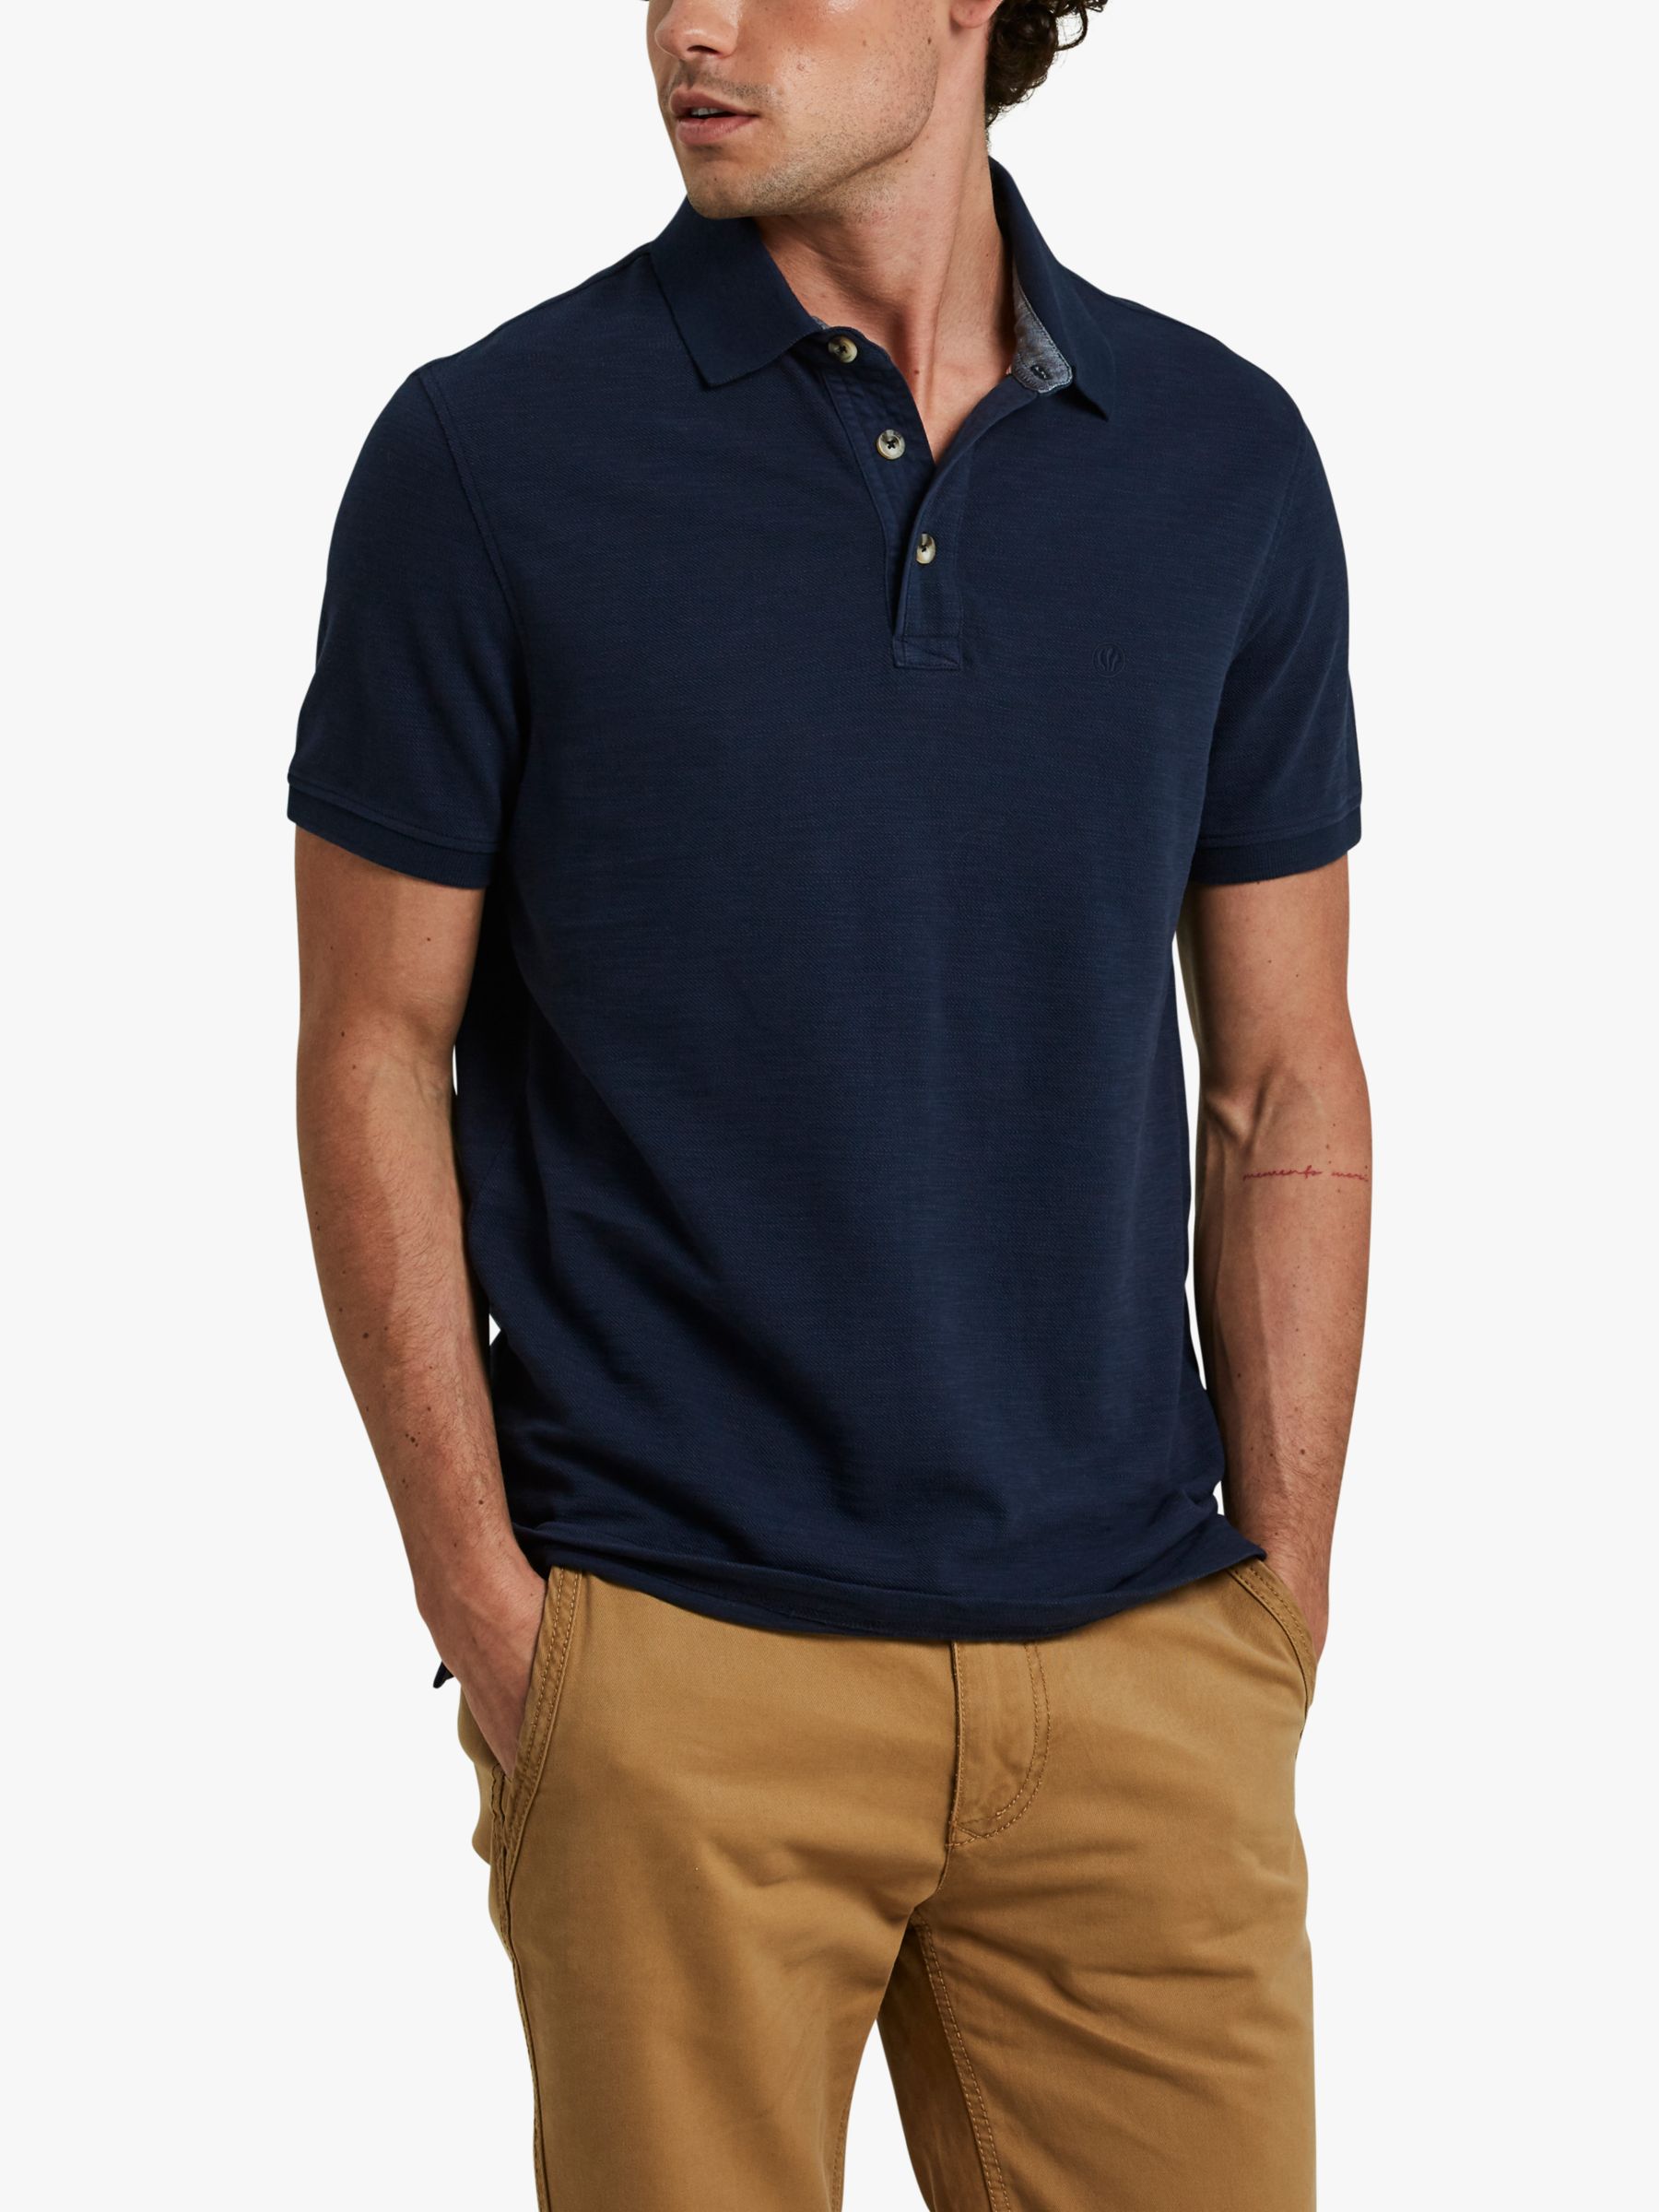 FatFace Ely Short Sleeve Polo Top, Navy at John Lewis & Partners